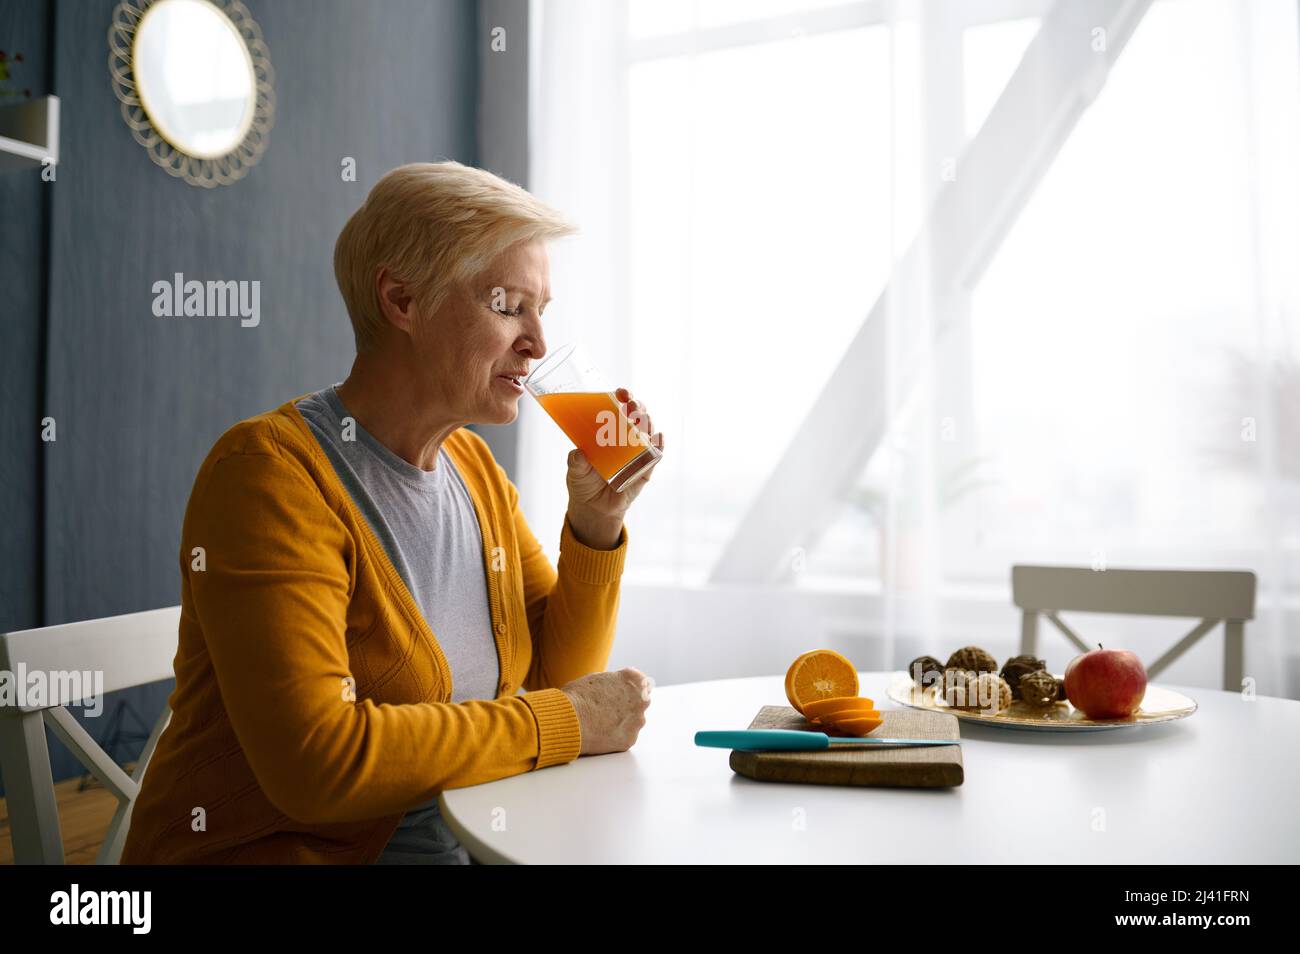 Smiling grey-haired woman holding glass with juice Stock Photo